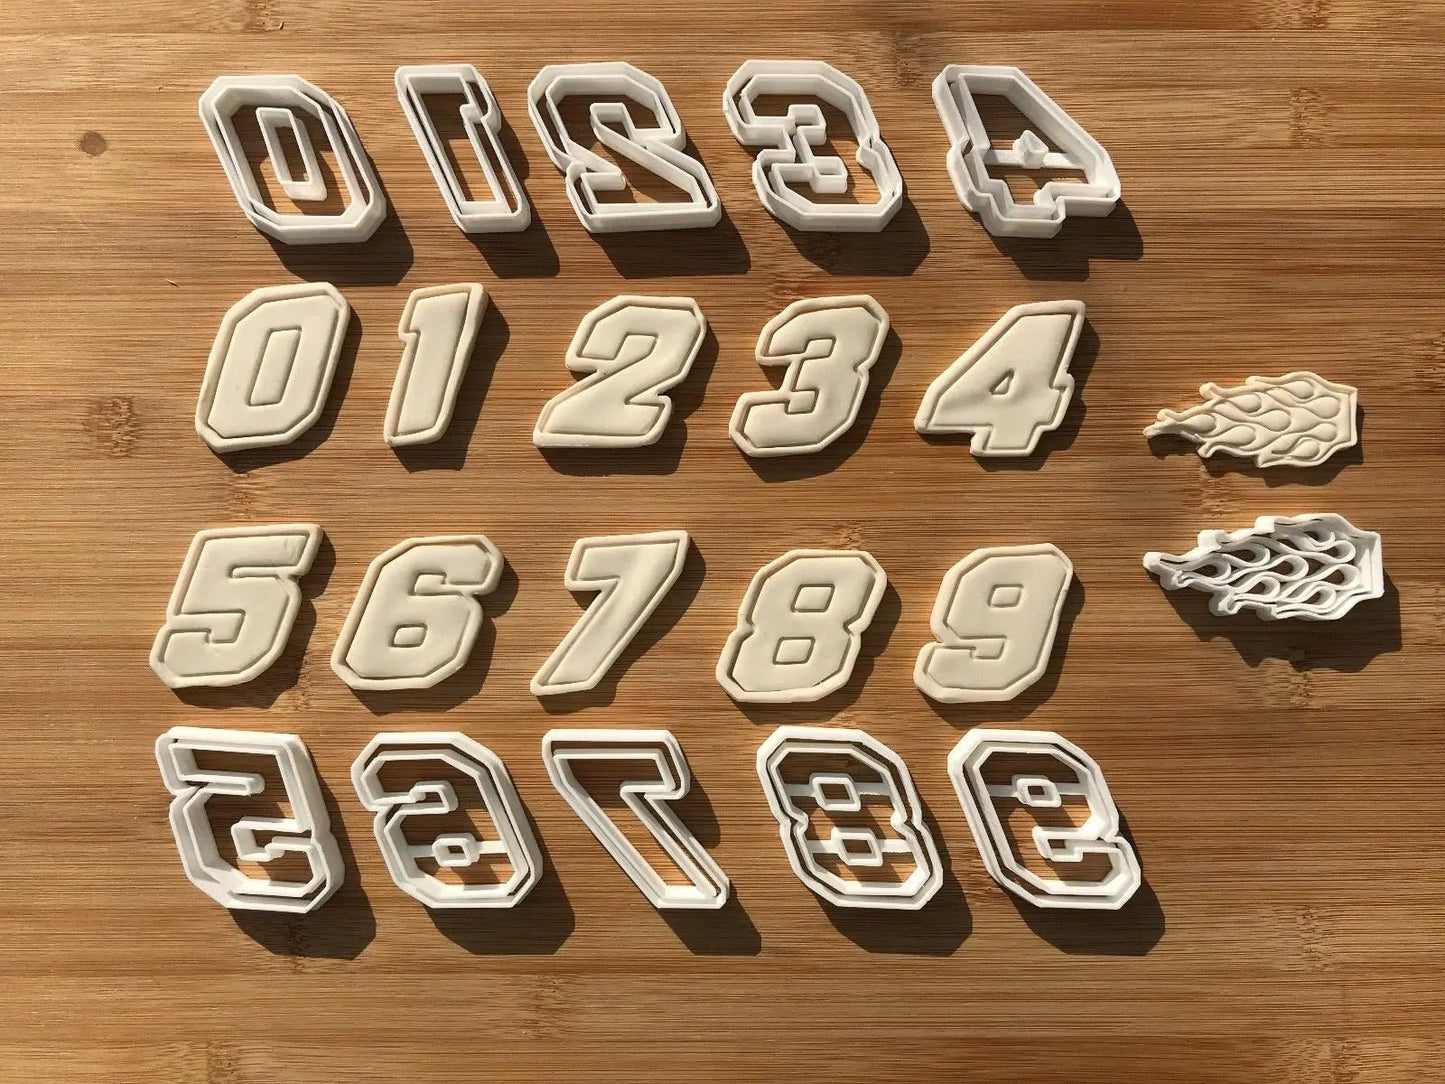 Nine 9 Racing Number Digit Cookie Cutter Dough Biscuit Pastry Fondant MEG cookie cutters